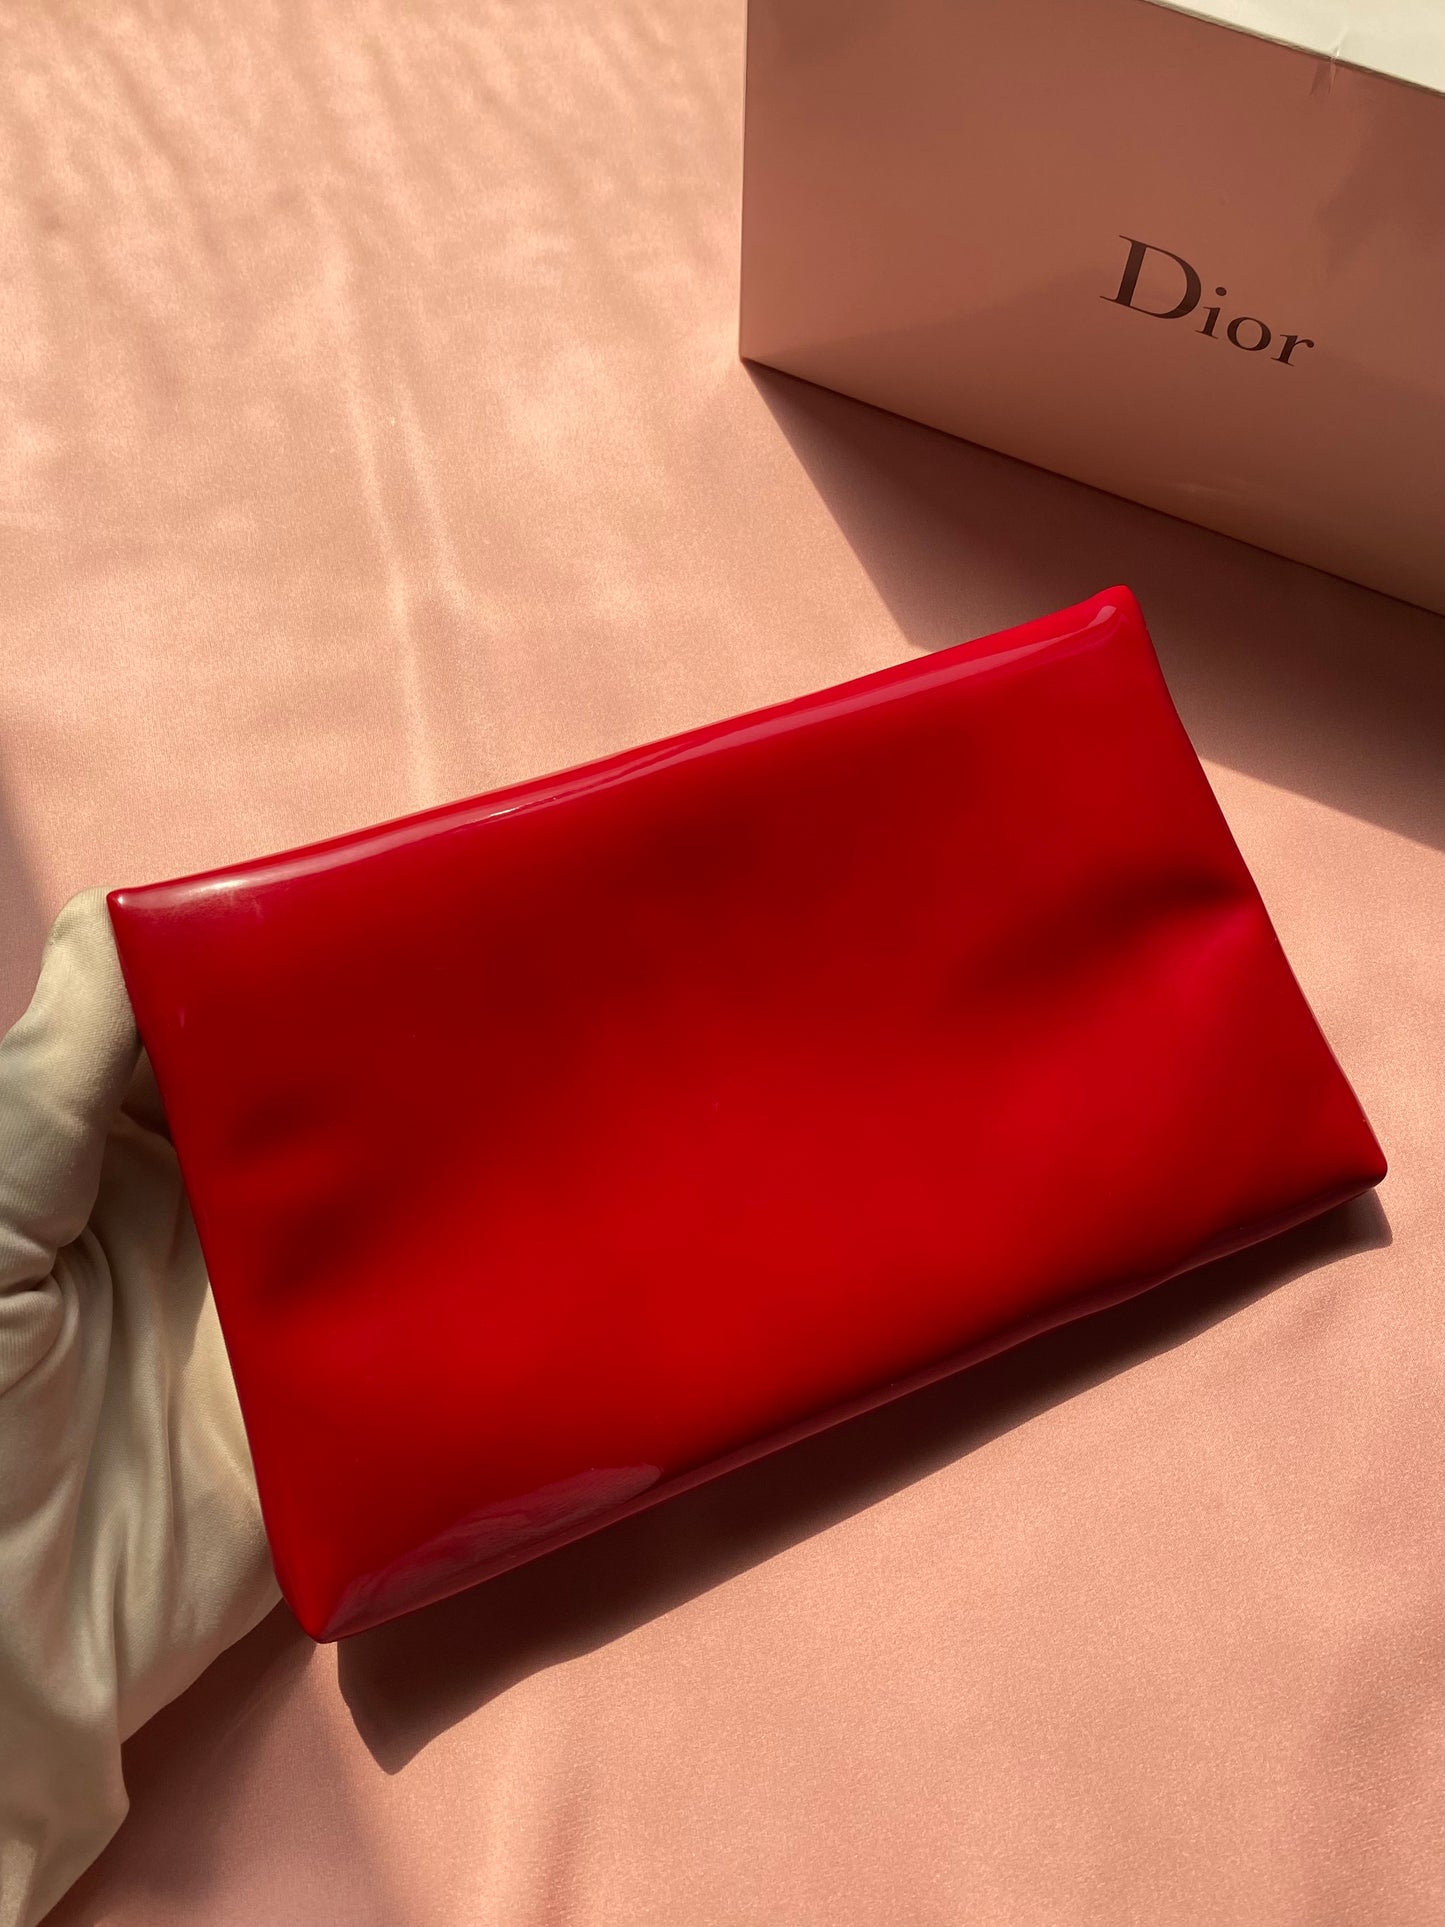 Dior Beauty Red Bag